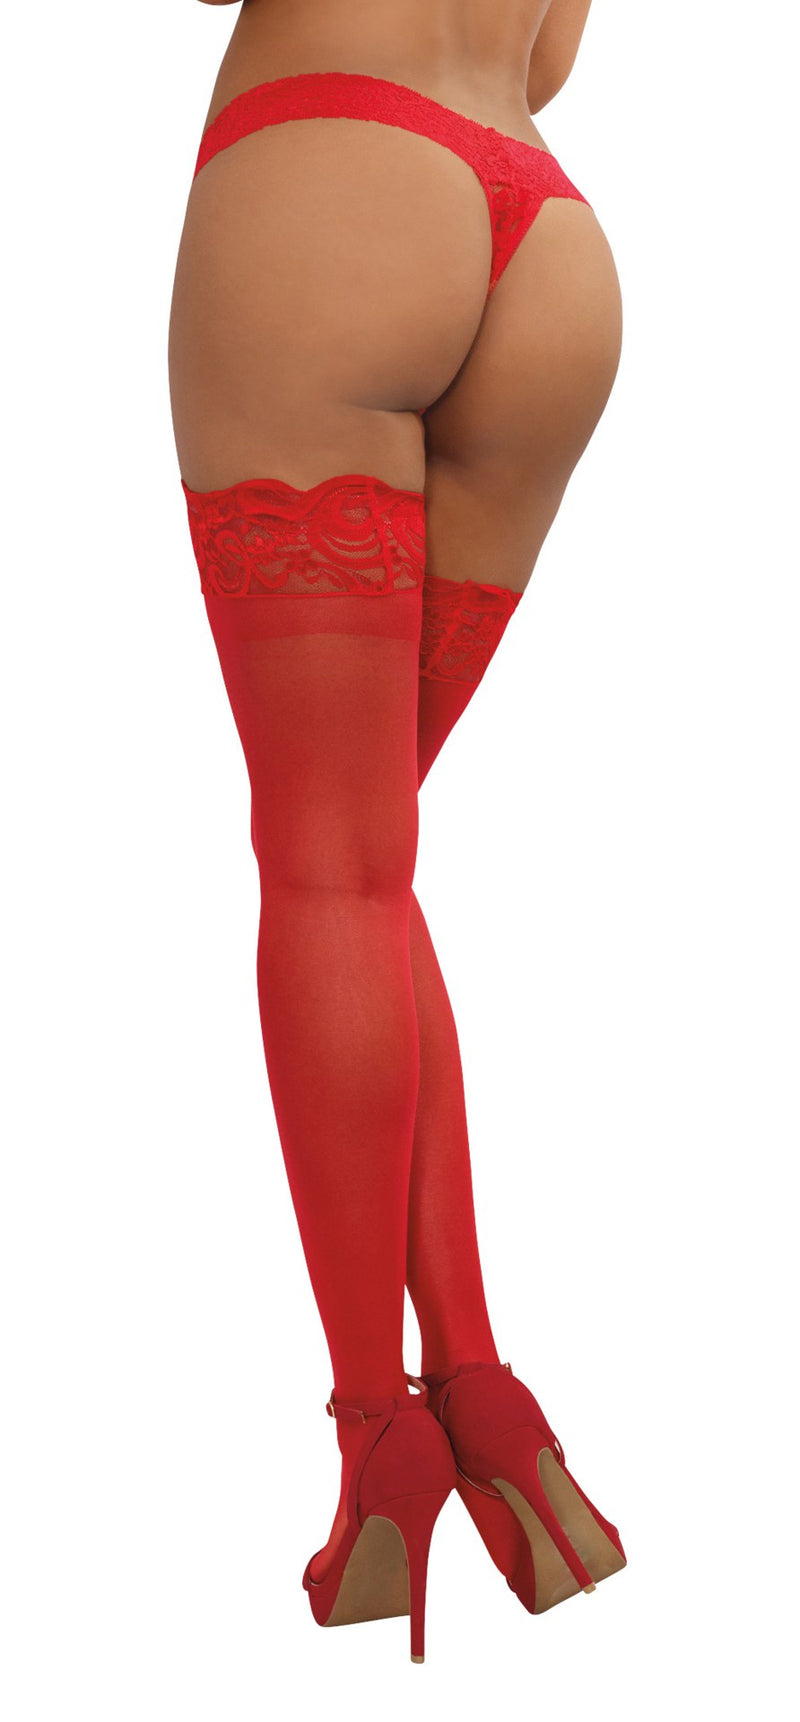 Sheer Thigh High Stockings in Red